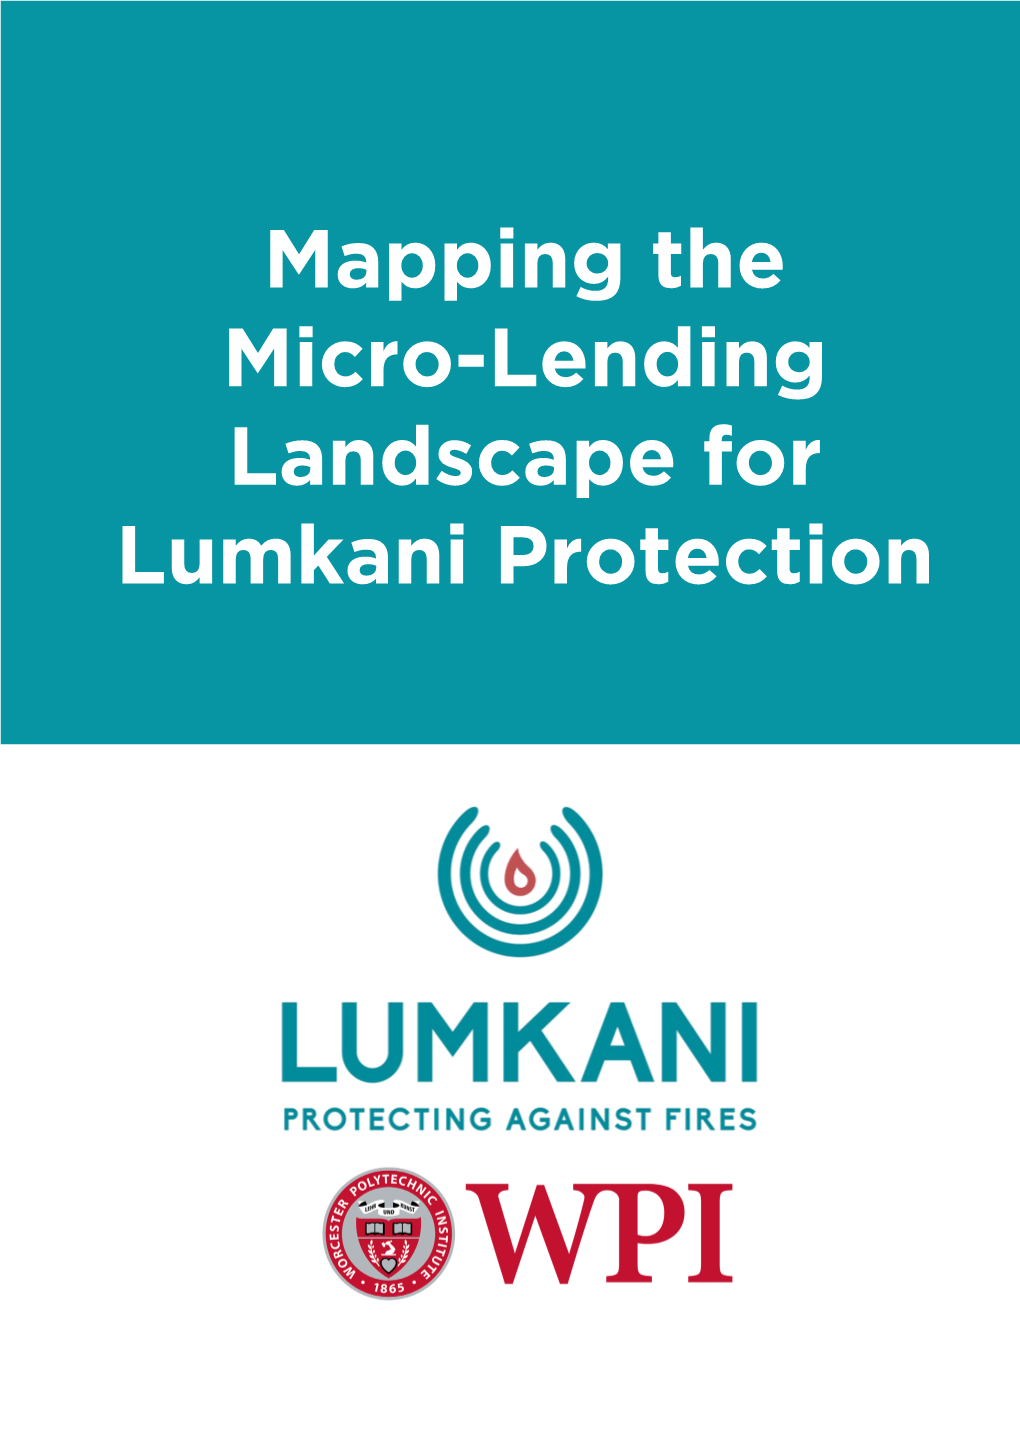 Mapping the Micro-Lending Landscape for Lumkani Protection